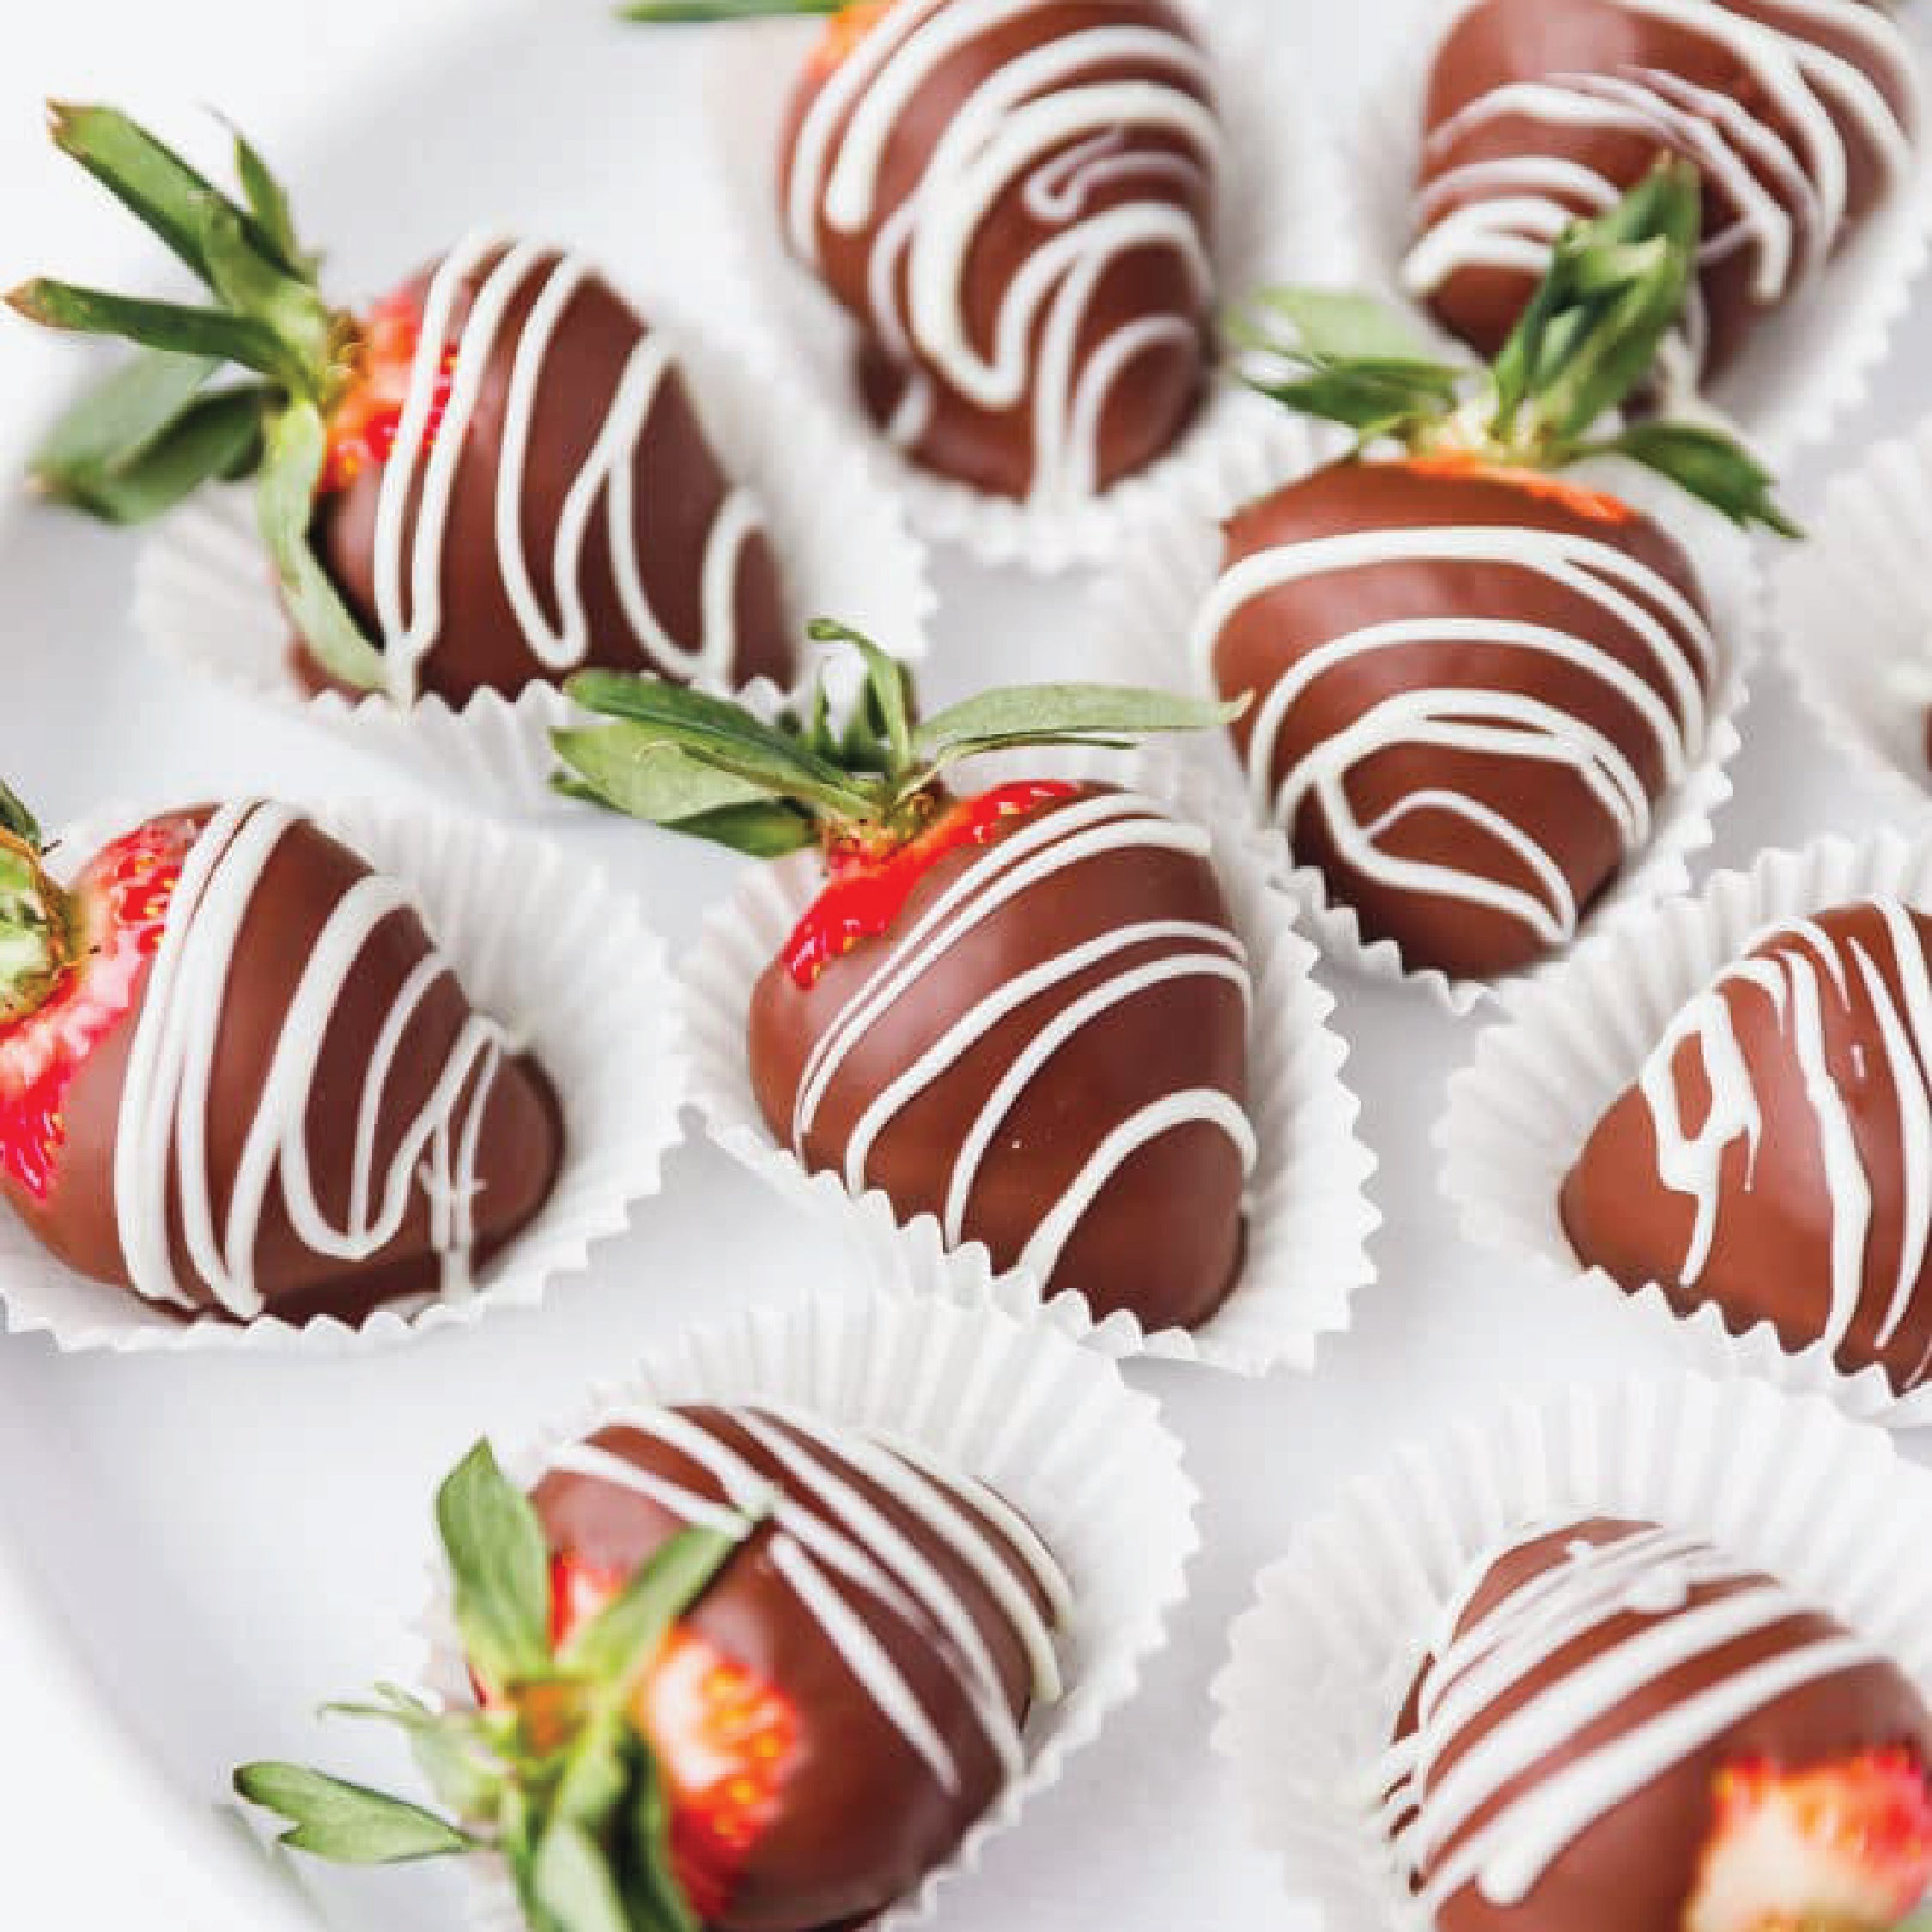 Chocolate Coated Strawberries (Box of 12) KHI Only